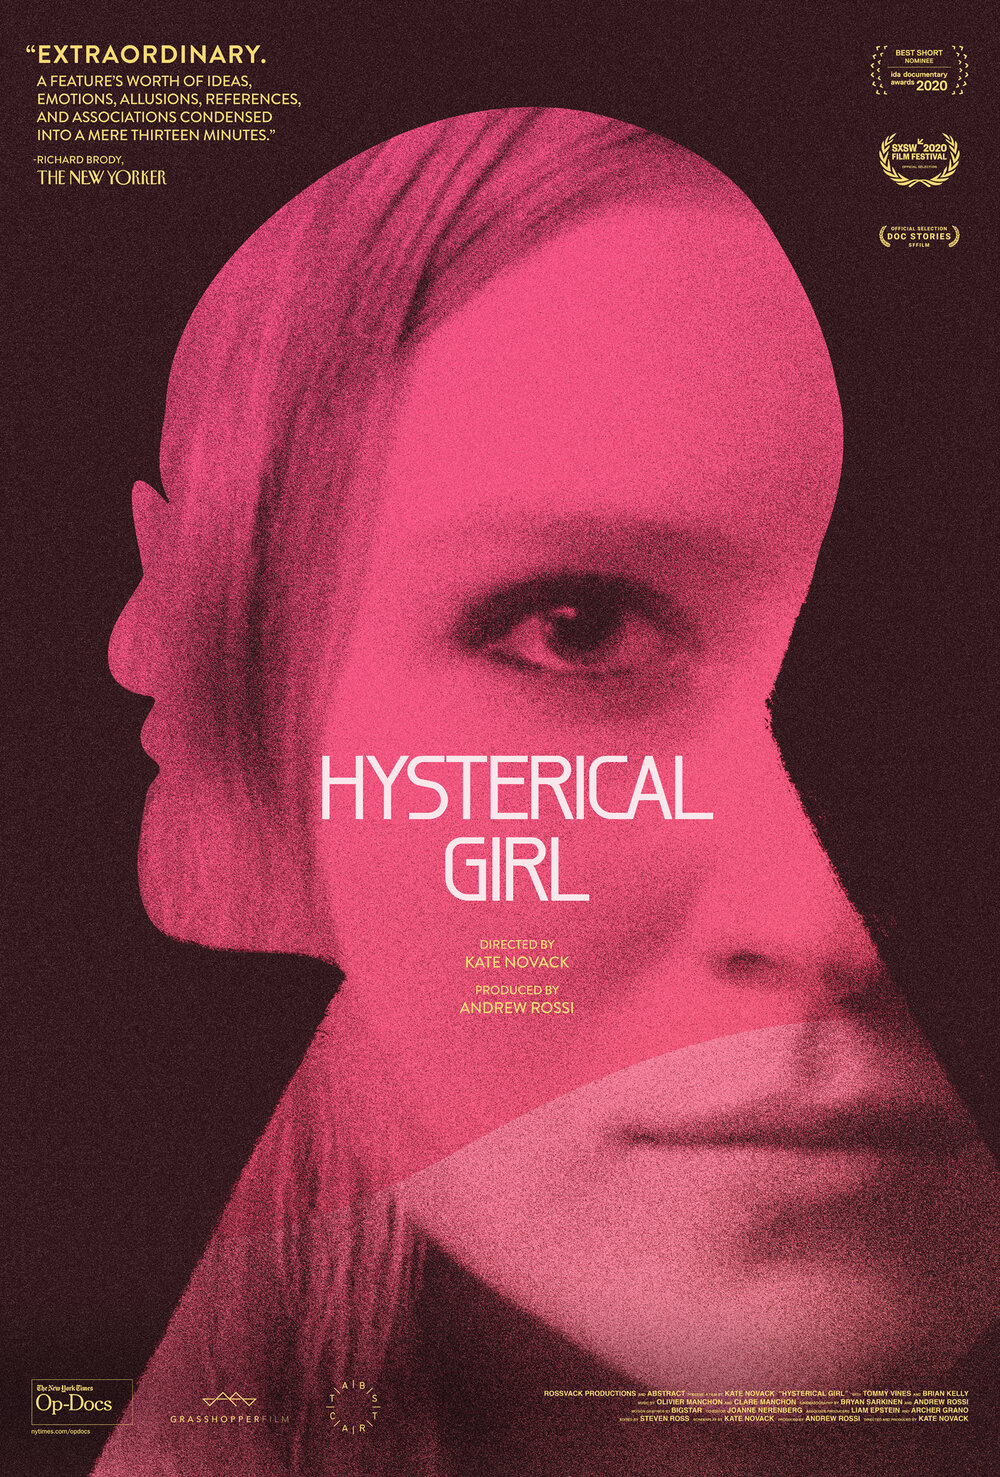 Hysterical Girl — Abstract